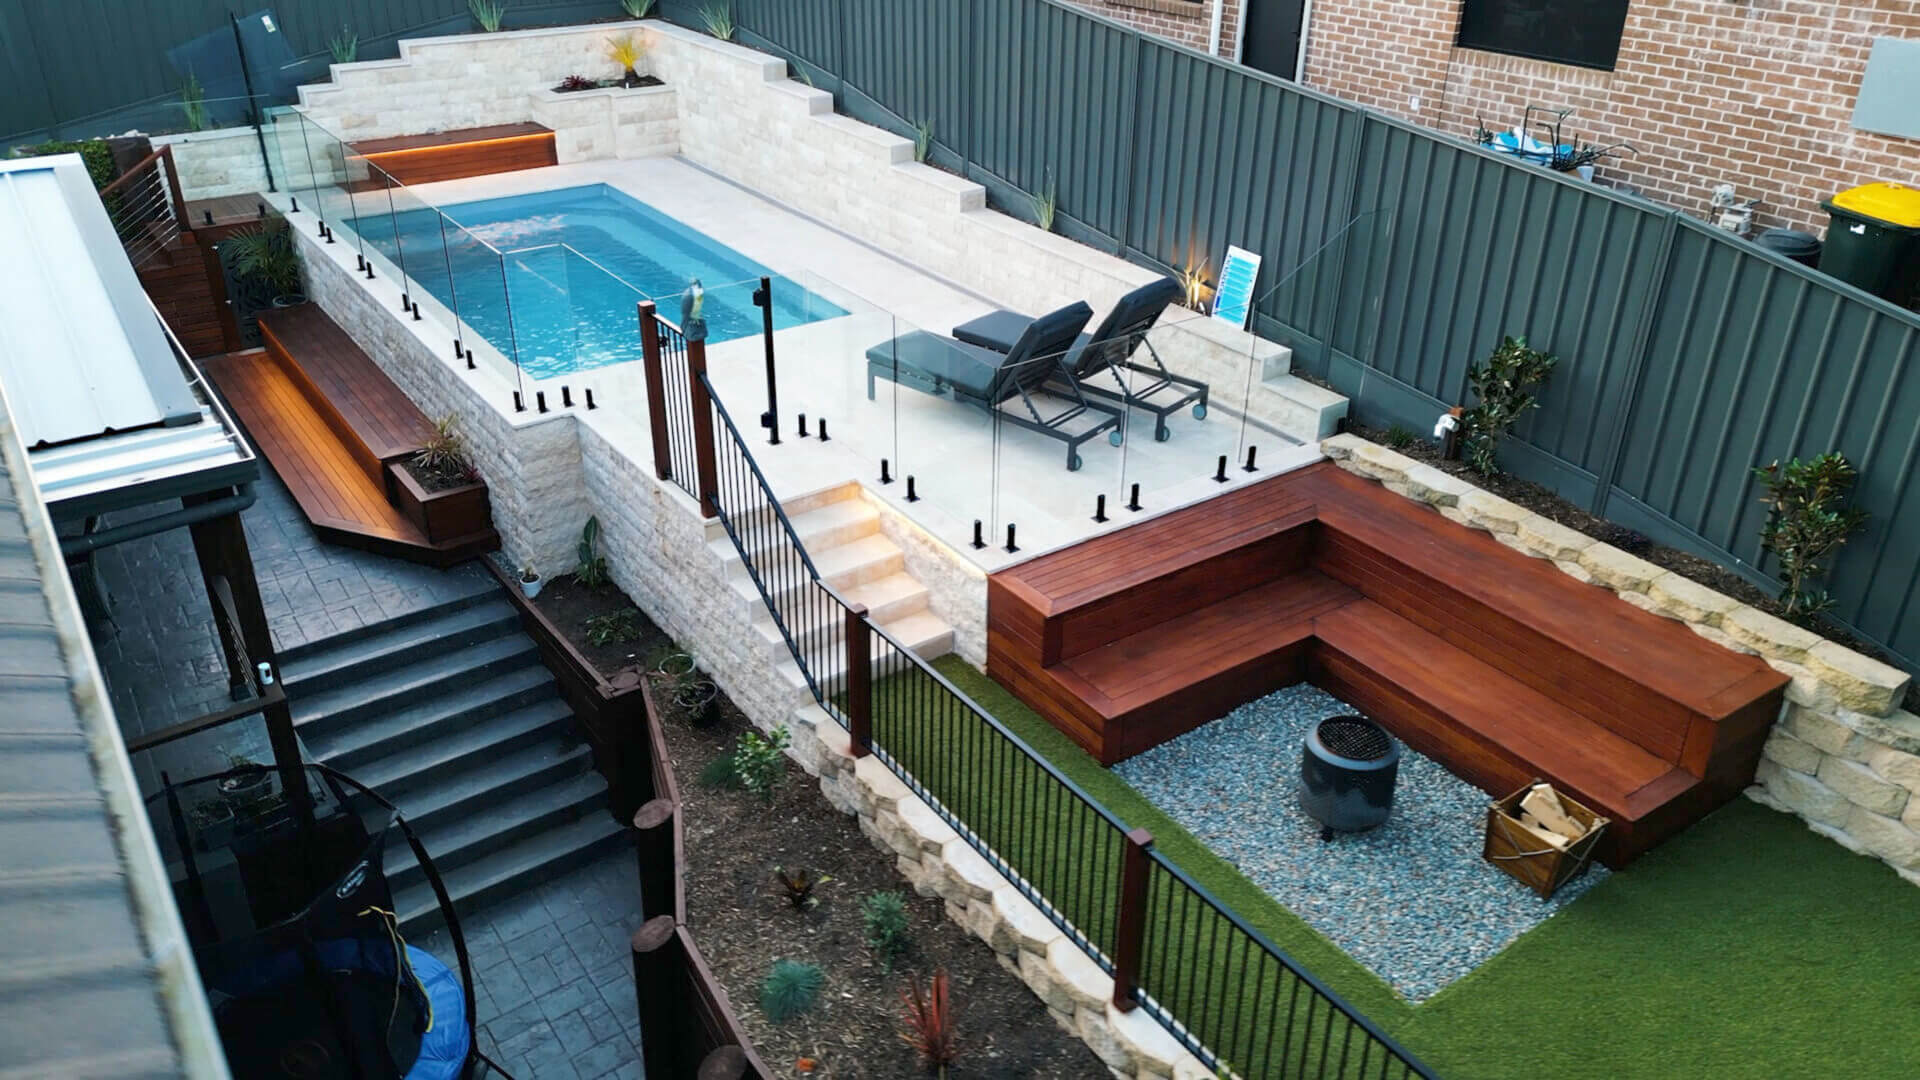 Newcastle Hunter Valley Pool surrounds Decking Synthetic Turf Retaining Wall Entertainment area